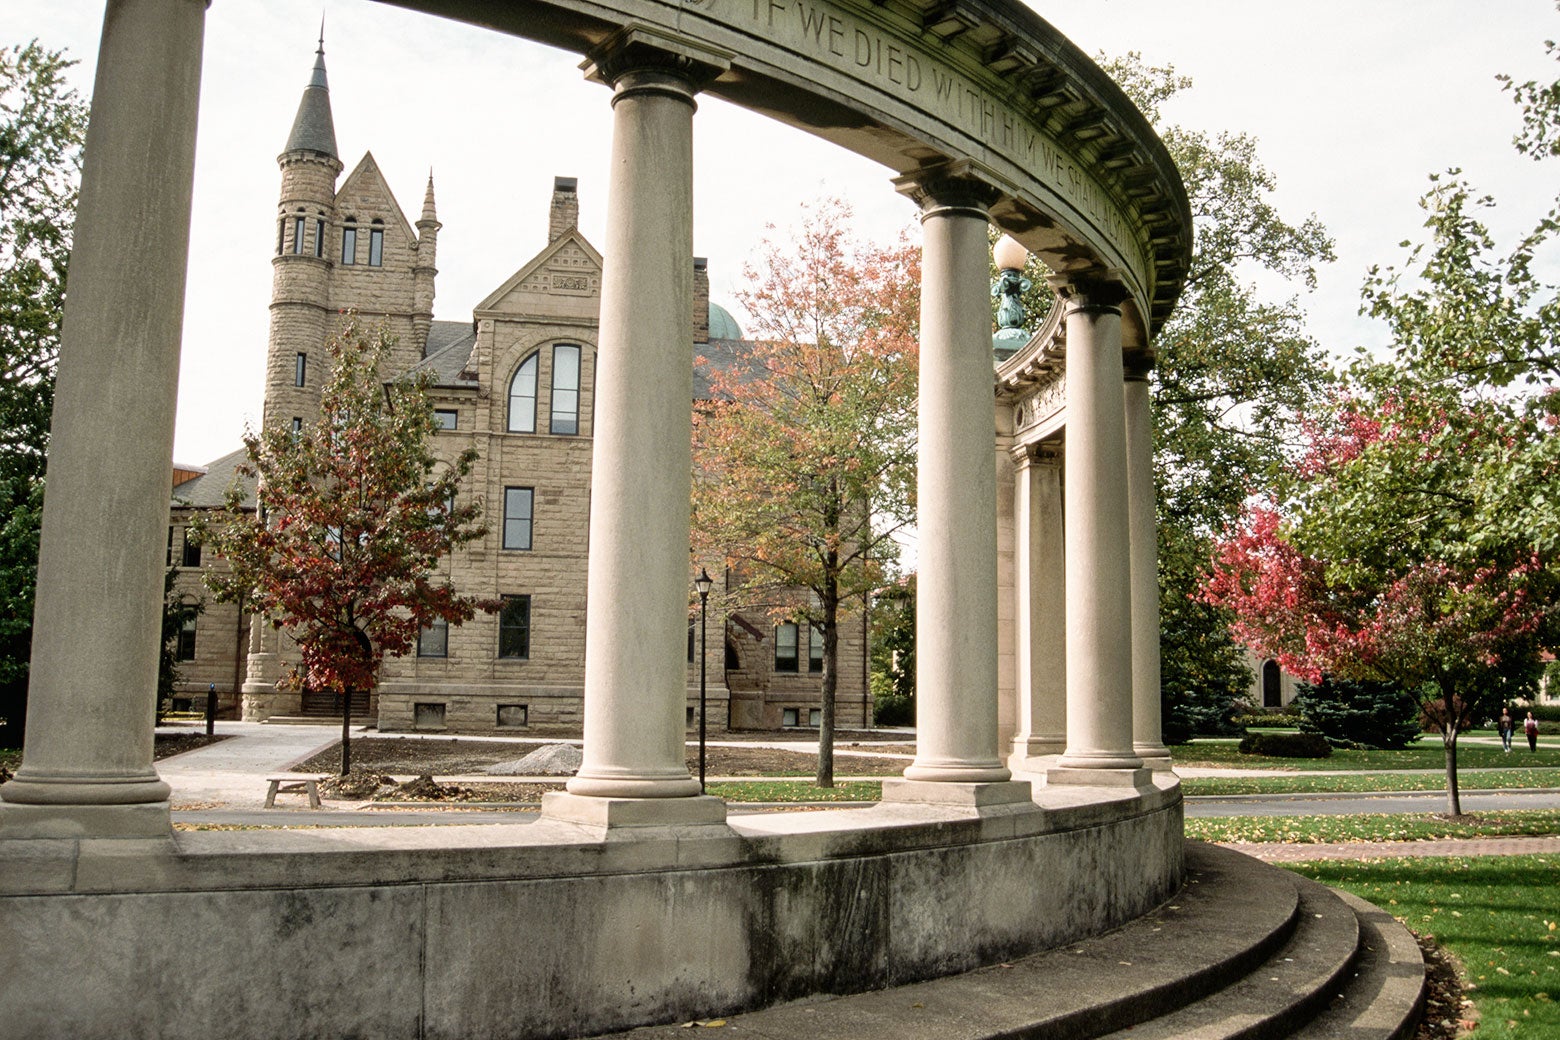 A colonnade in front of a historic building on a college campus.